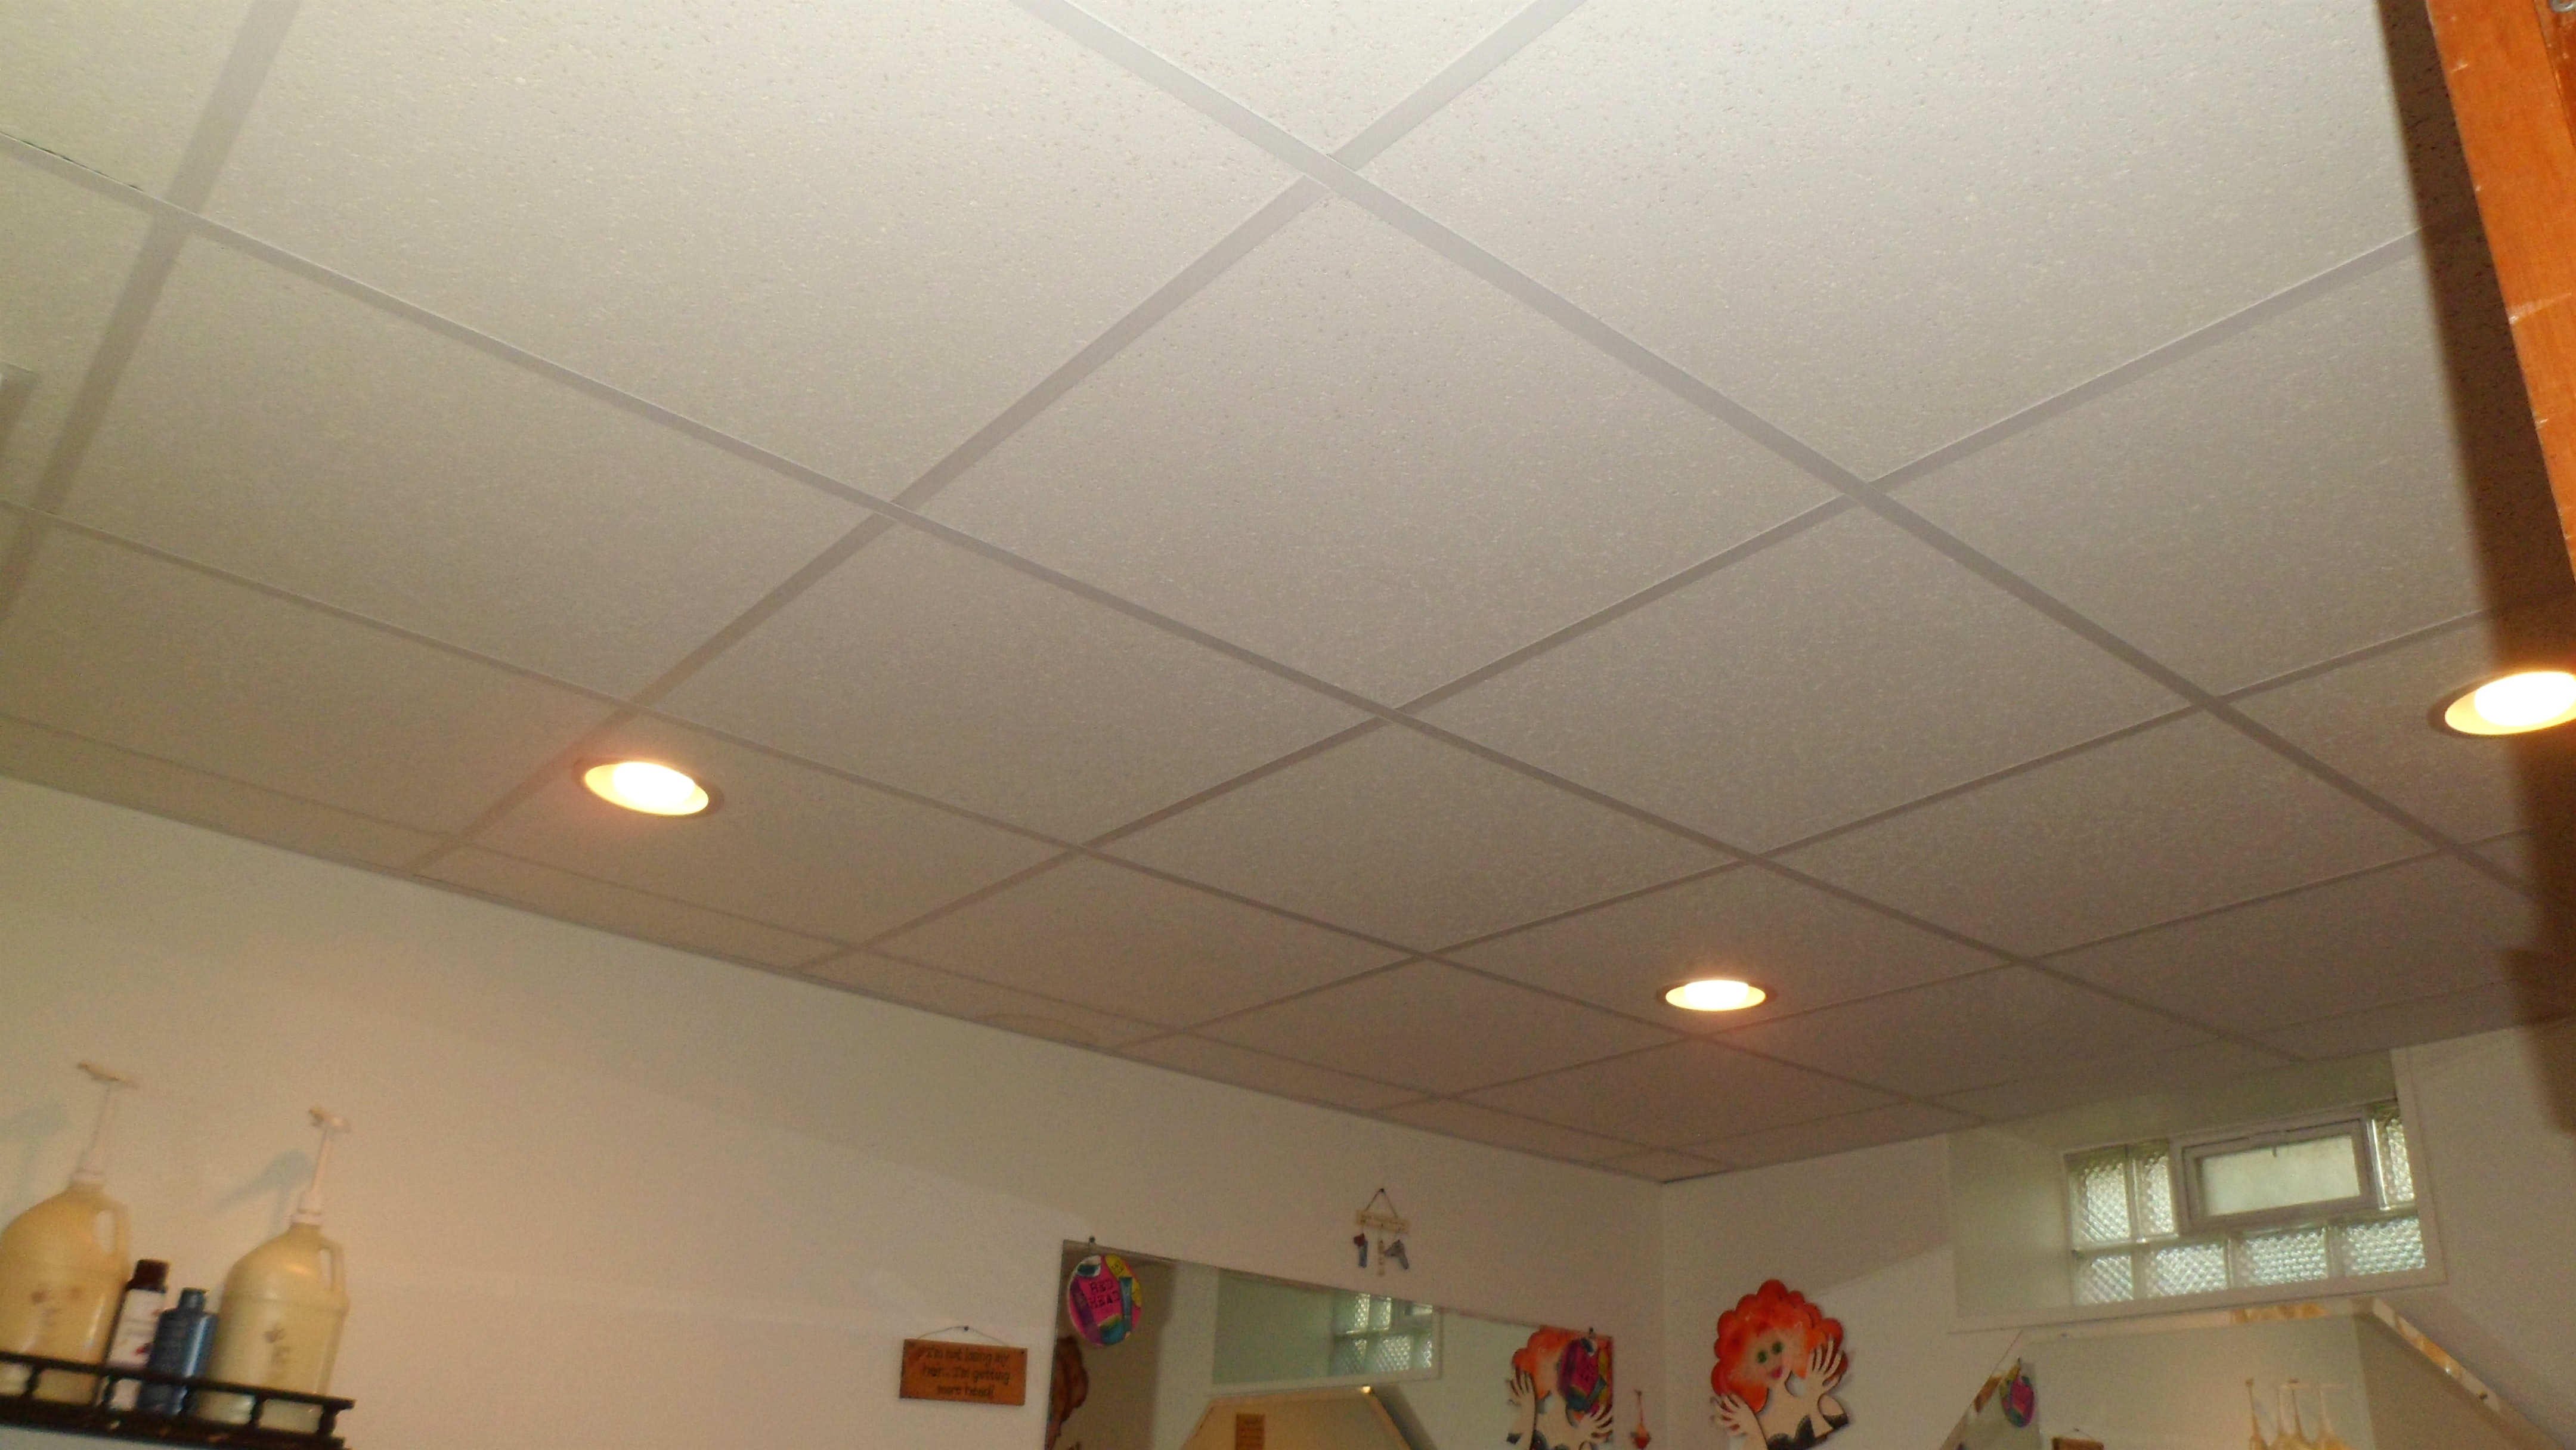 Recessed Lights For Drop Ceilinglighting for suspended ceiling systems ceiling lights